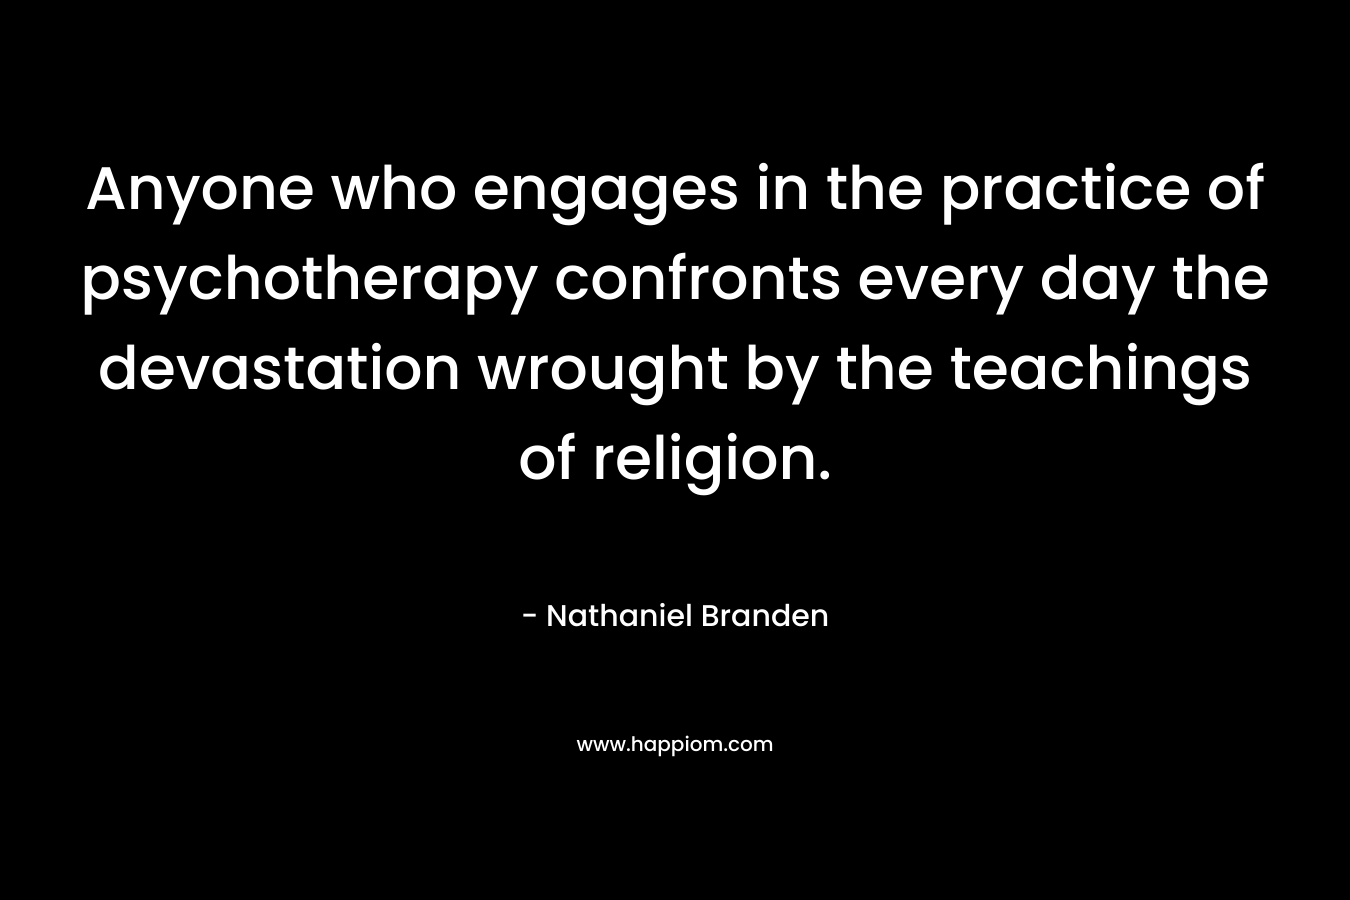 Anyone who engages in the practice of psychotherapy confronts every day the devastation wrought by the teachings of religion. – Nathaniel Branden